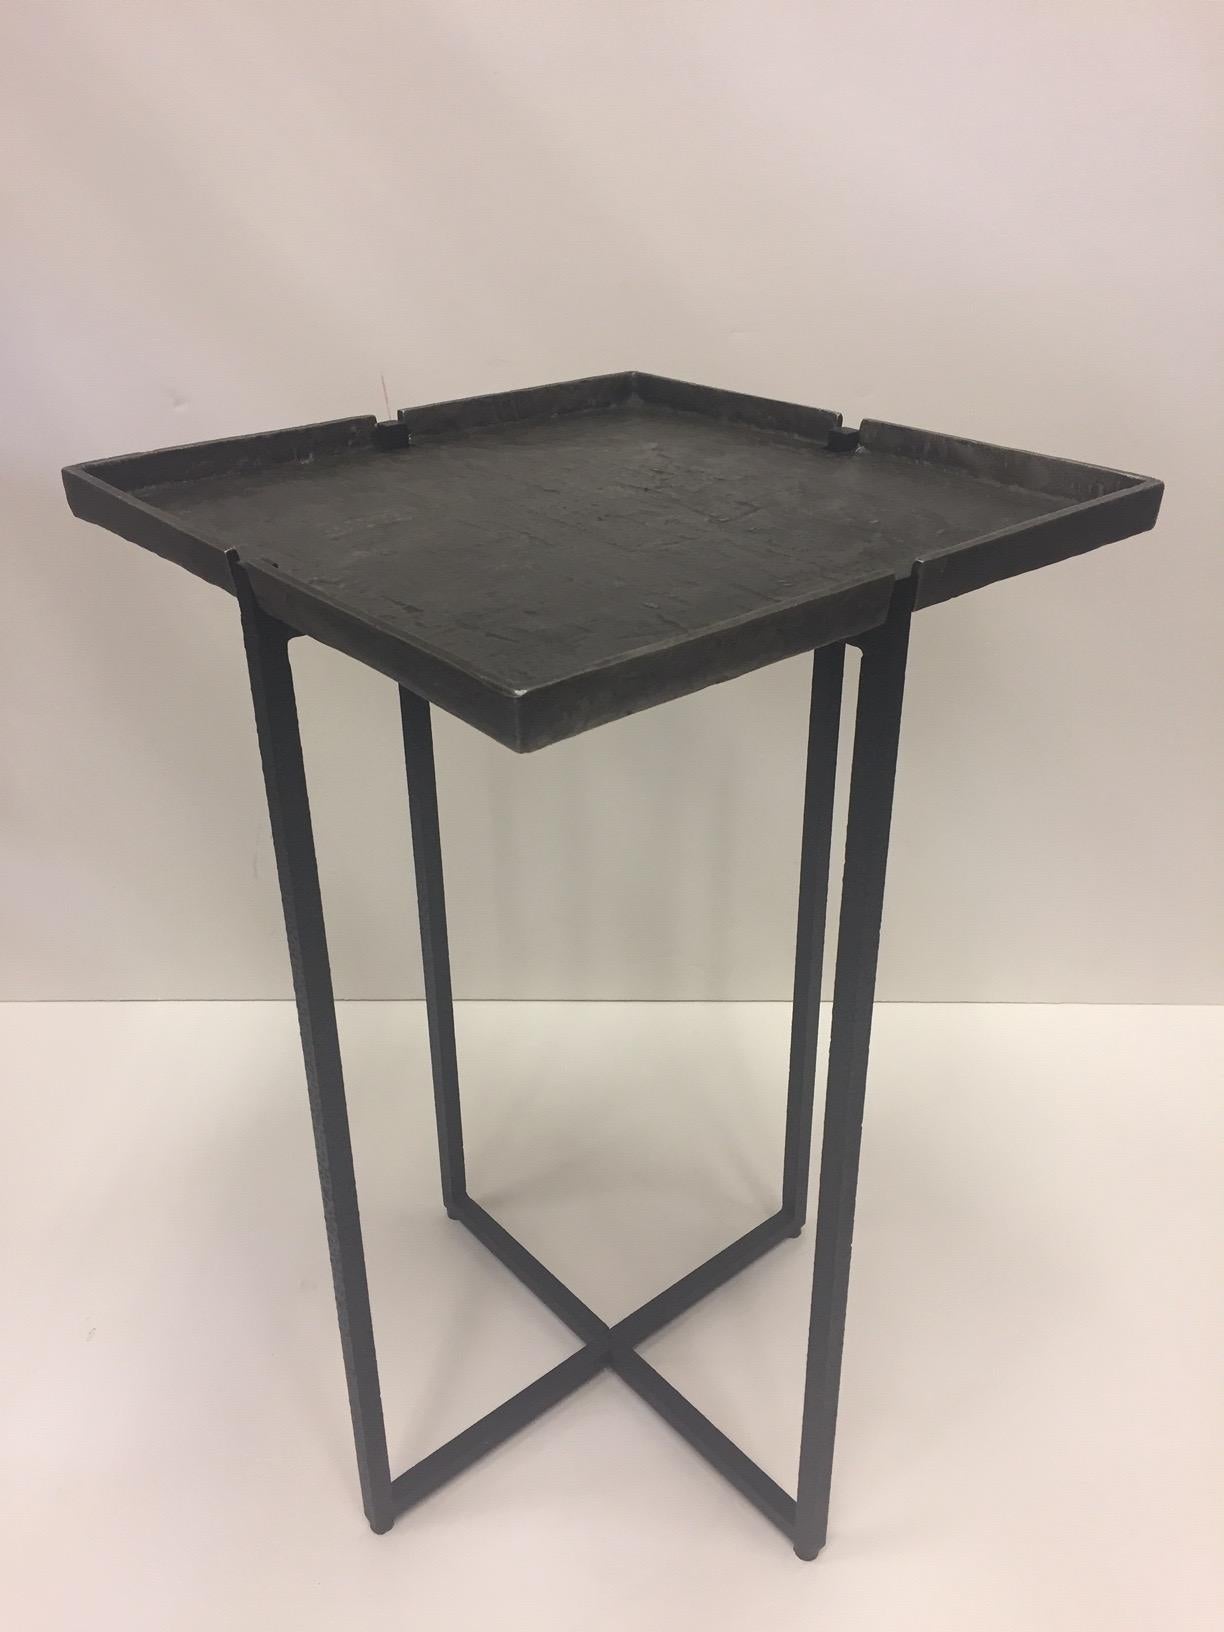 Iron and cast aluminum occasional table having handsome removable square top and elegant criss cross base. Label Michael Aram underneath.